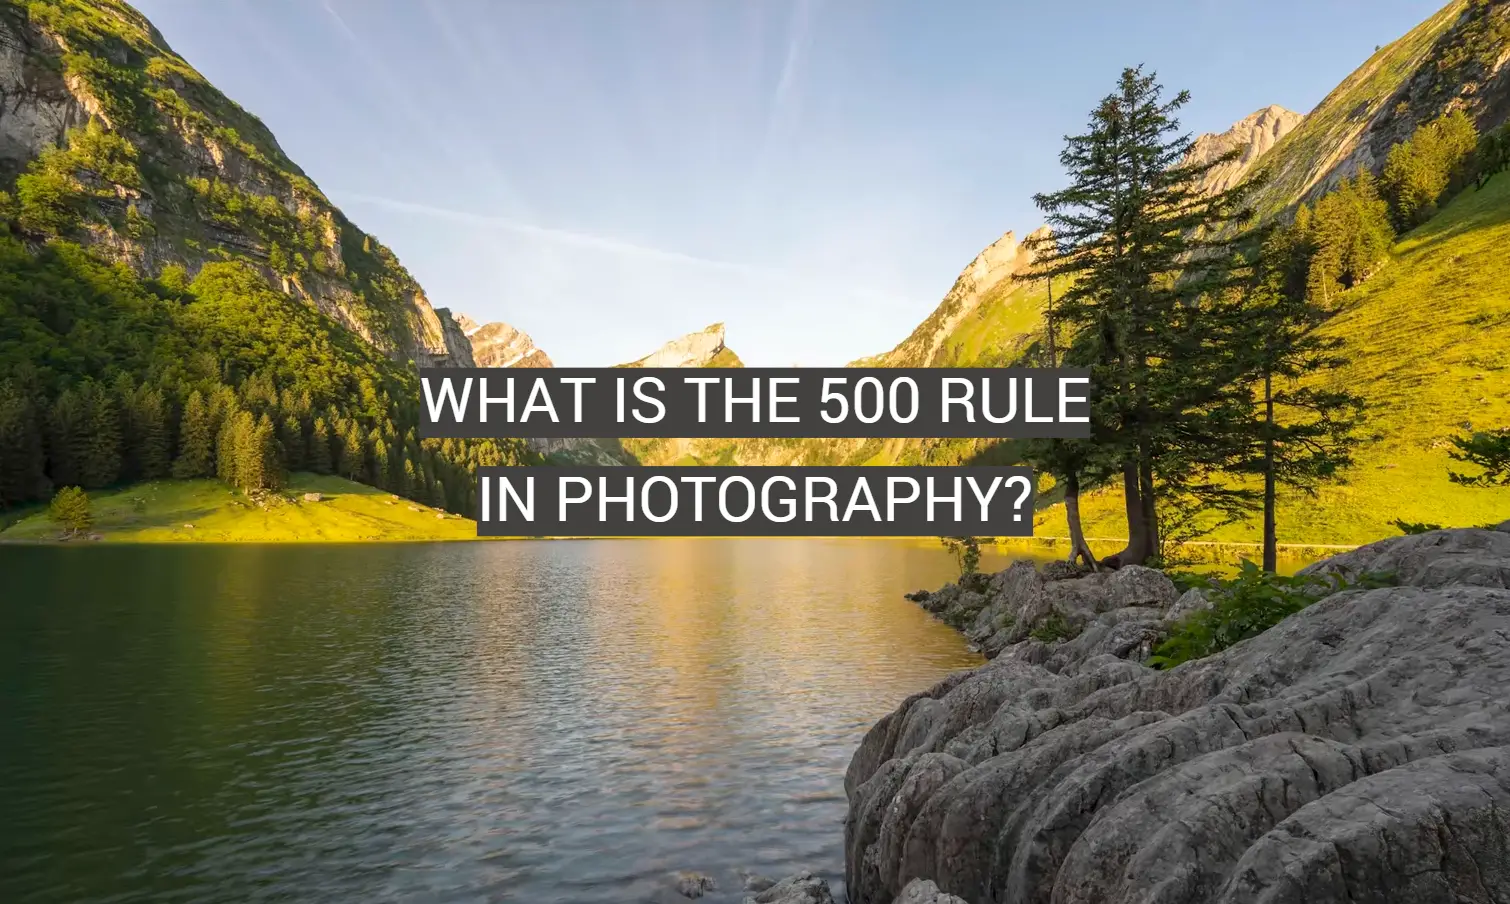 What Is the 500 Rule in Photography?